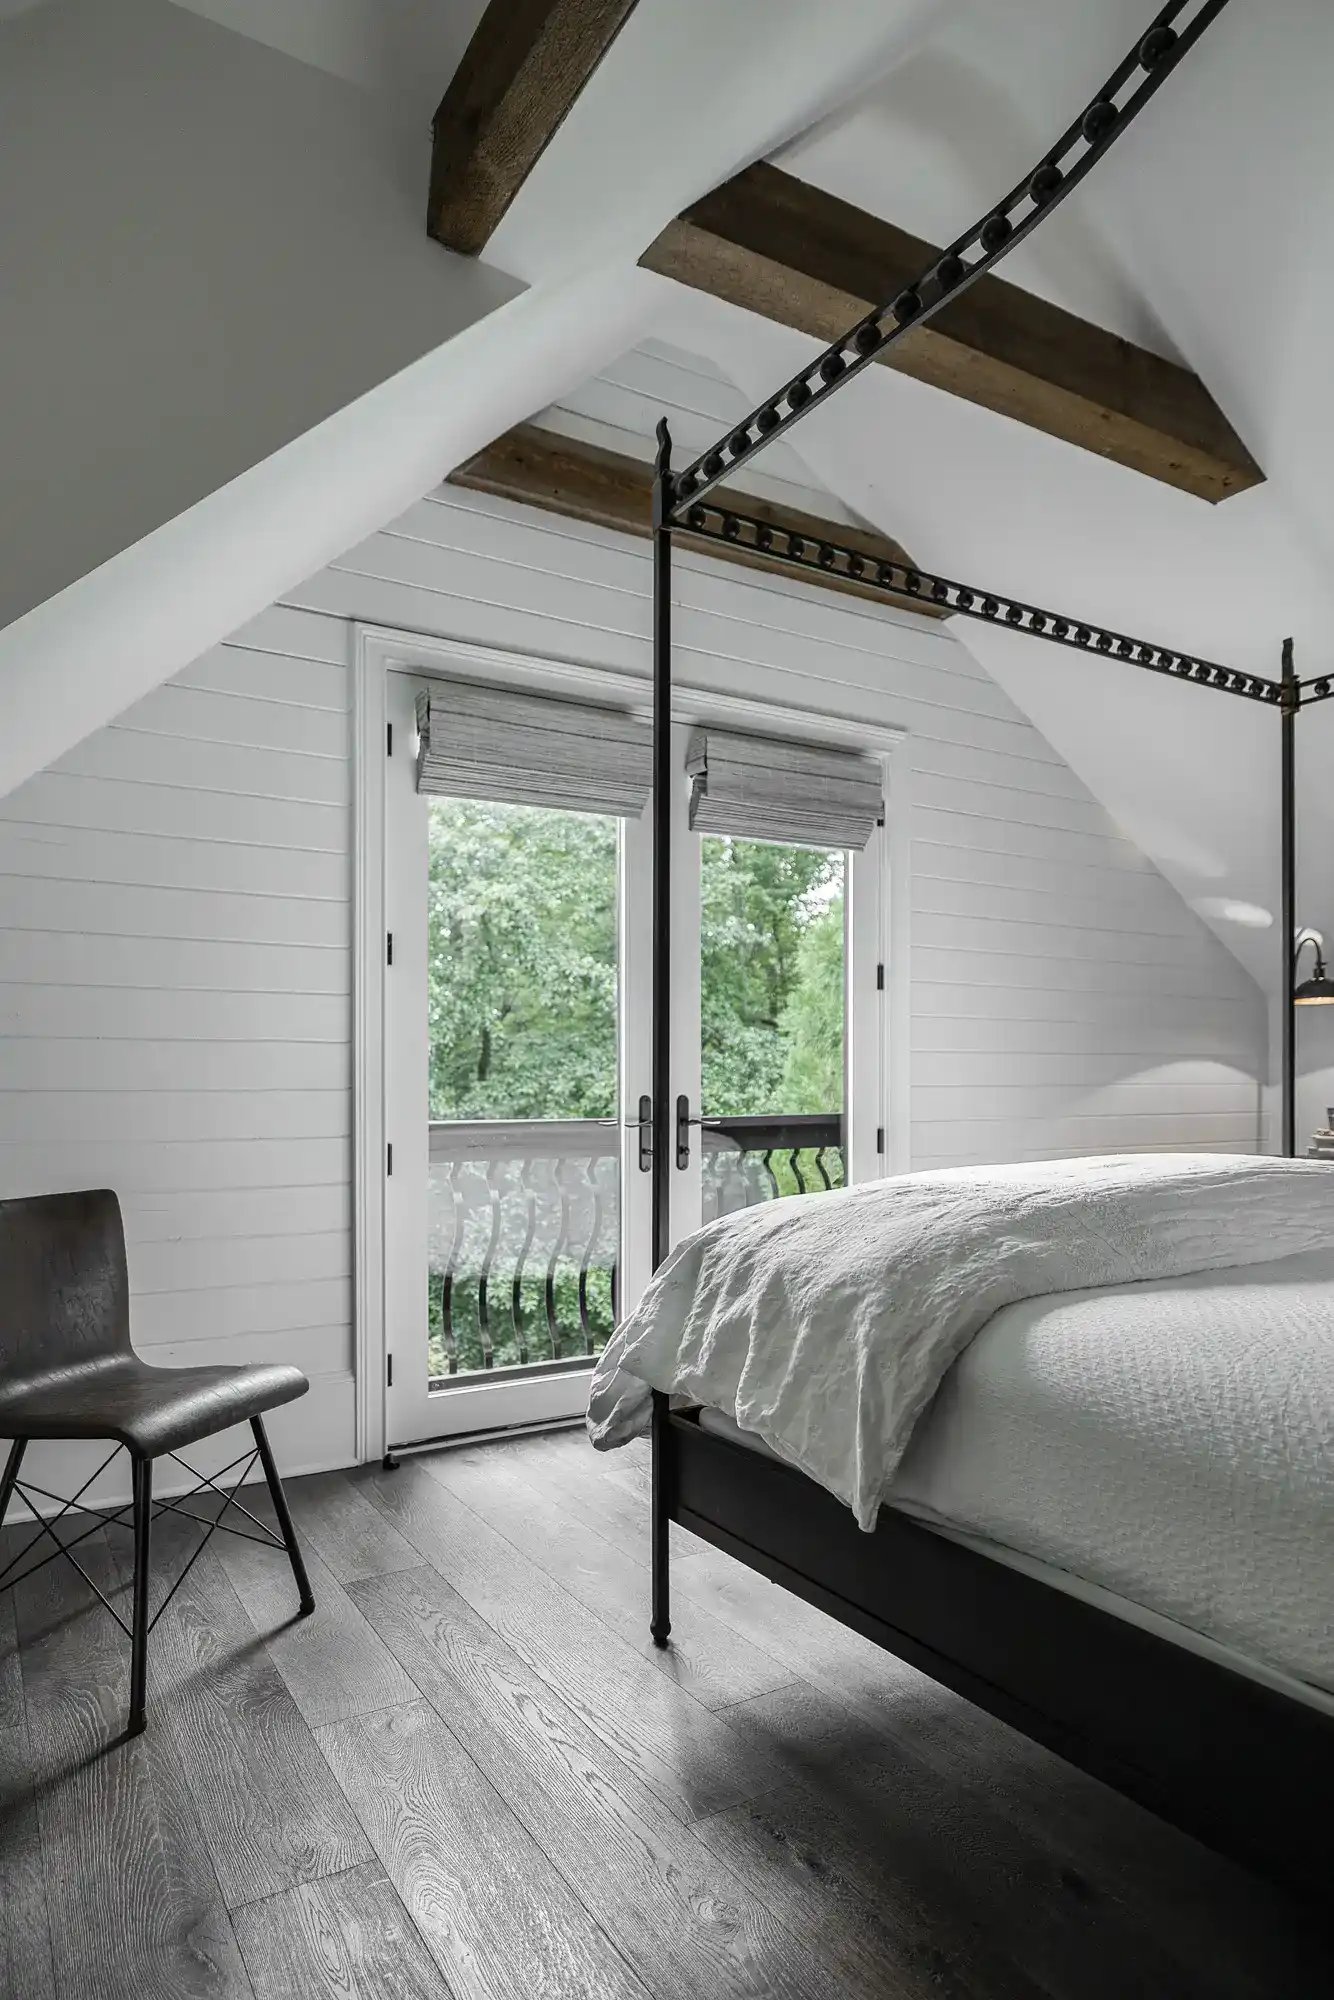 Minimalist bedroom with exposed beams, shiplap walls, and French doors opening to a lush view.